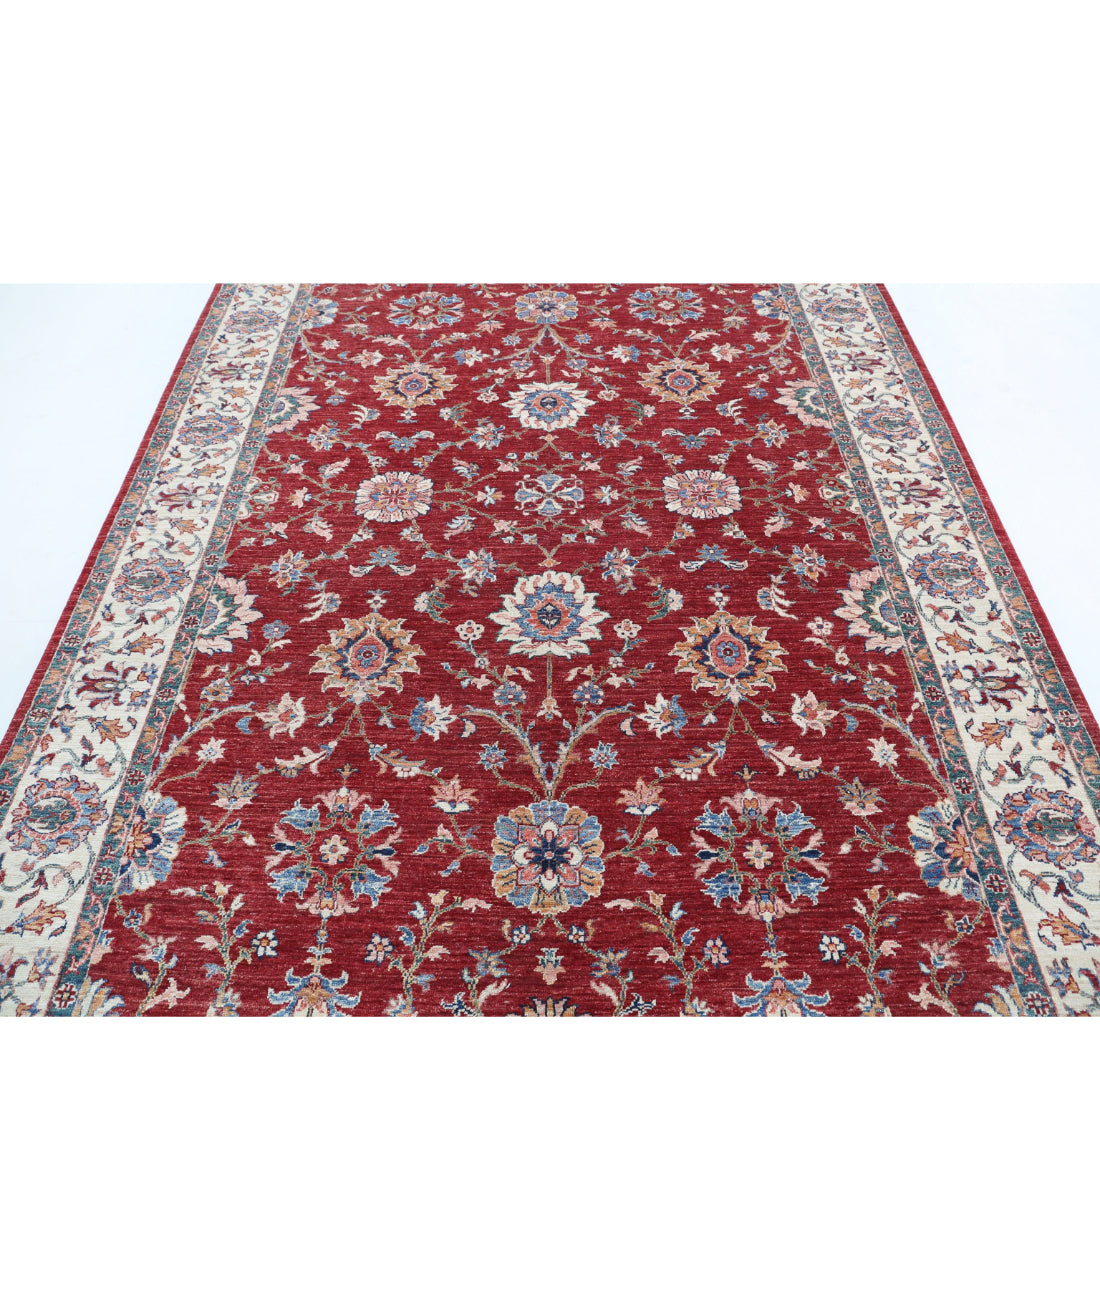 Ziegler 6'7'' X 9'8'' Hand-Knotted Wool Rug 6'7'' x 9'8'' (198 X 290) / Red / Ivory